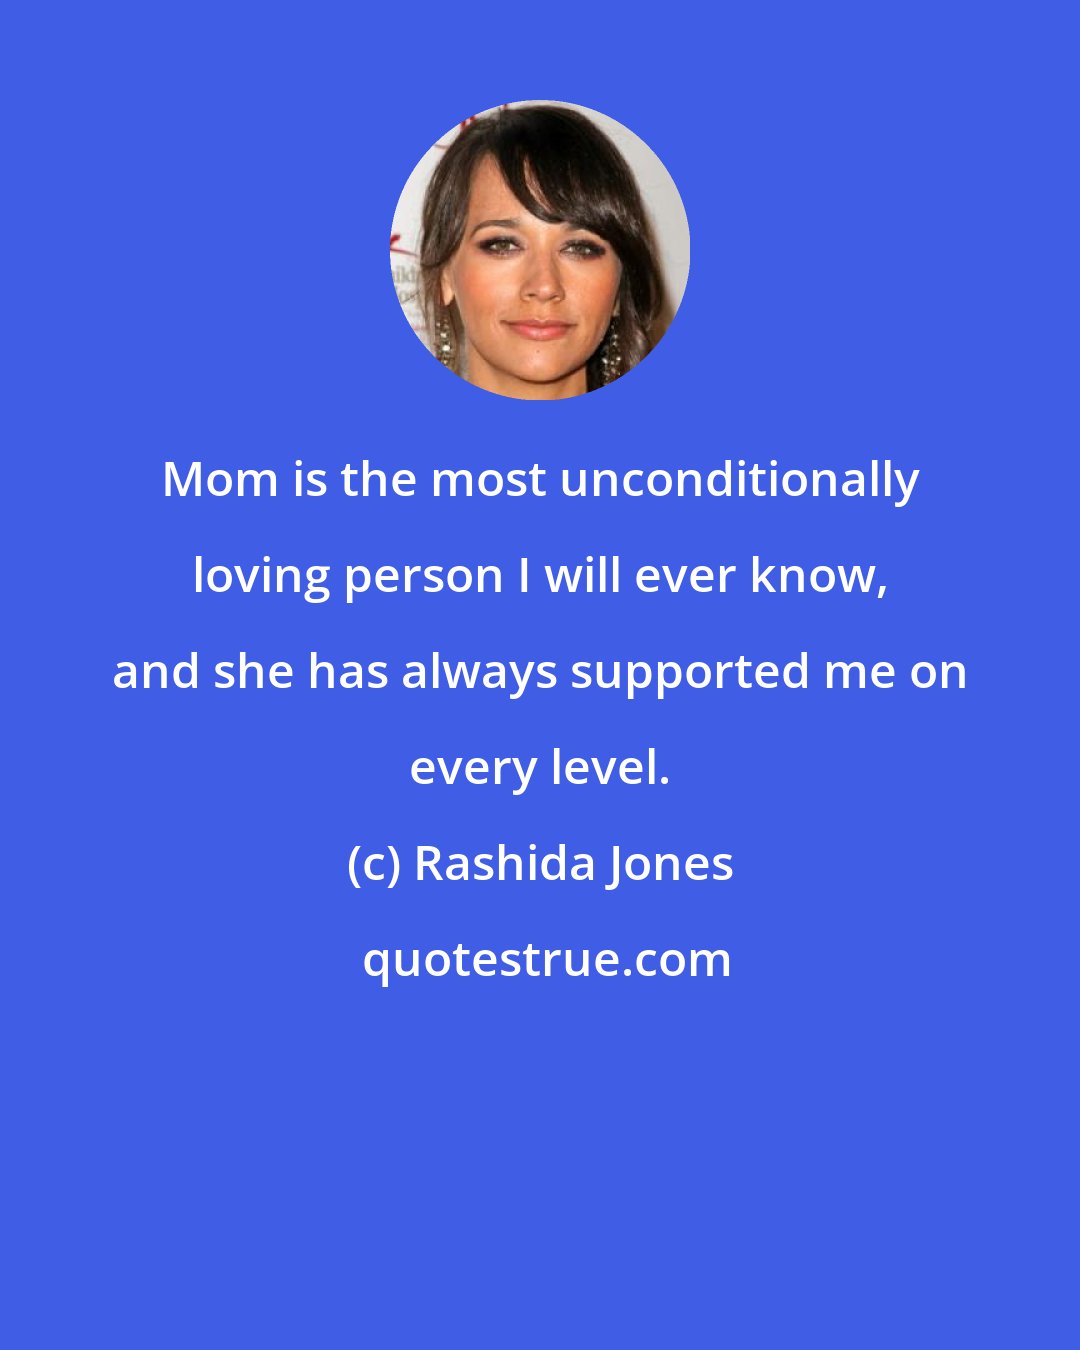 Rashida Jones: Mom is the most unconditionally loving person I will ever know, and she has always supported me on every level.